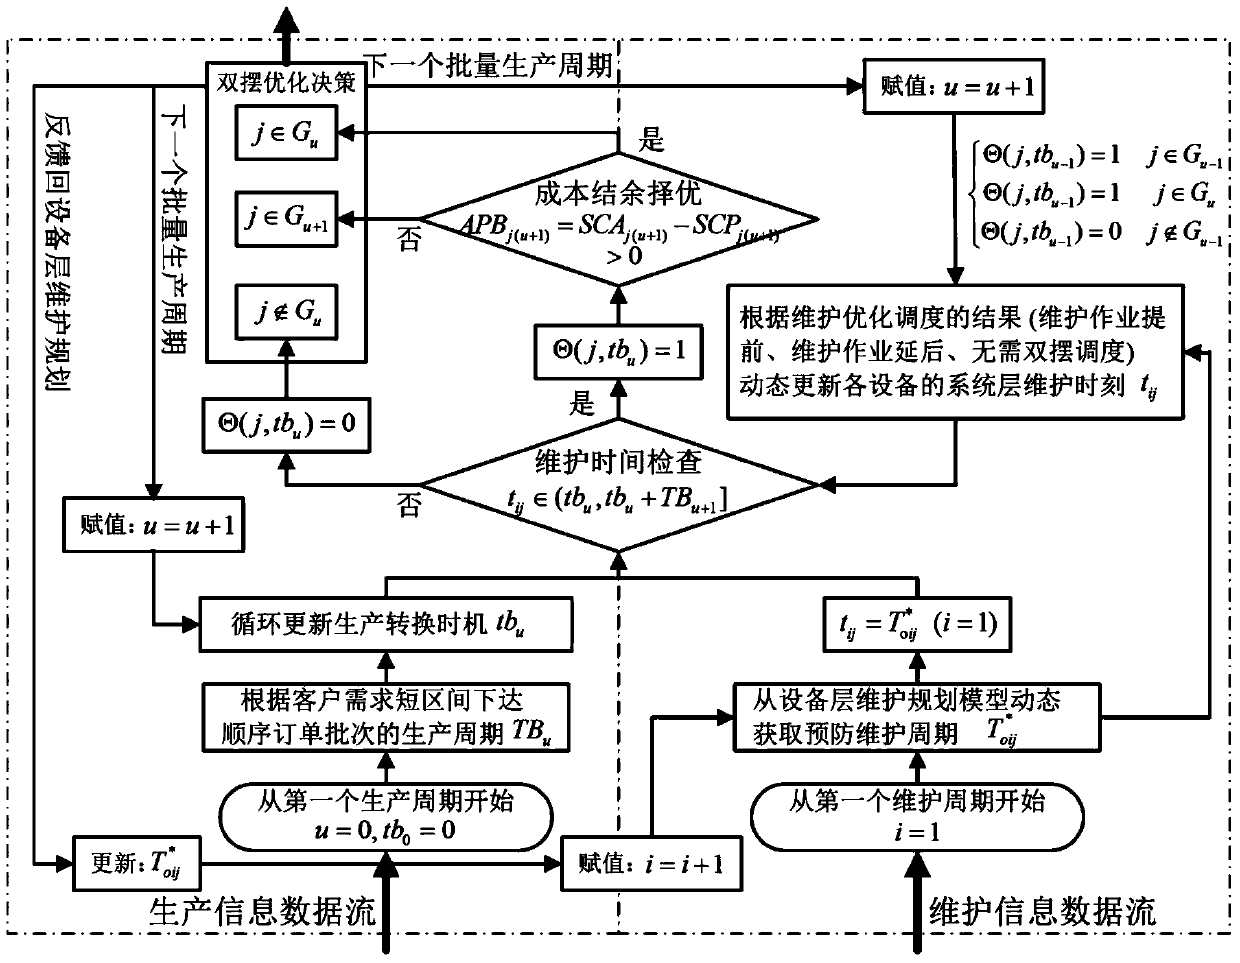 Prevention and maintenance associated scheduling optimization method of large-batch customization production system